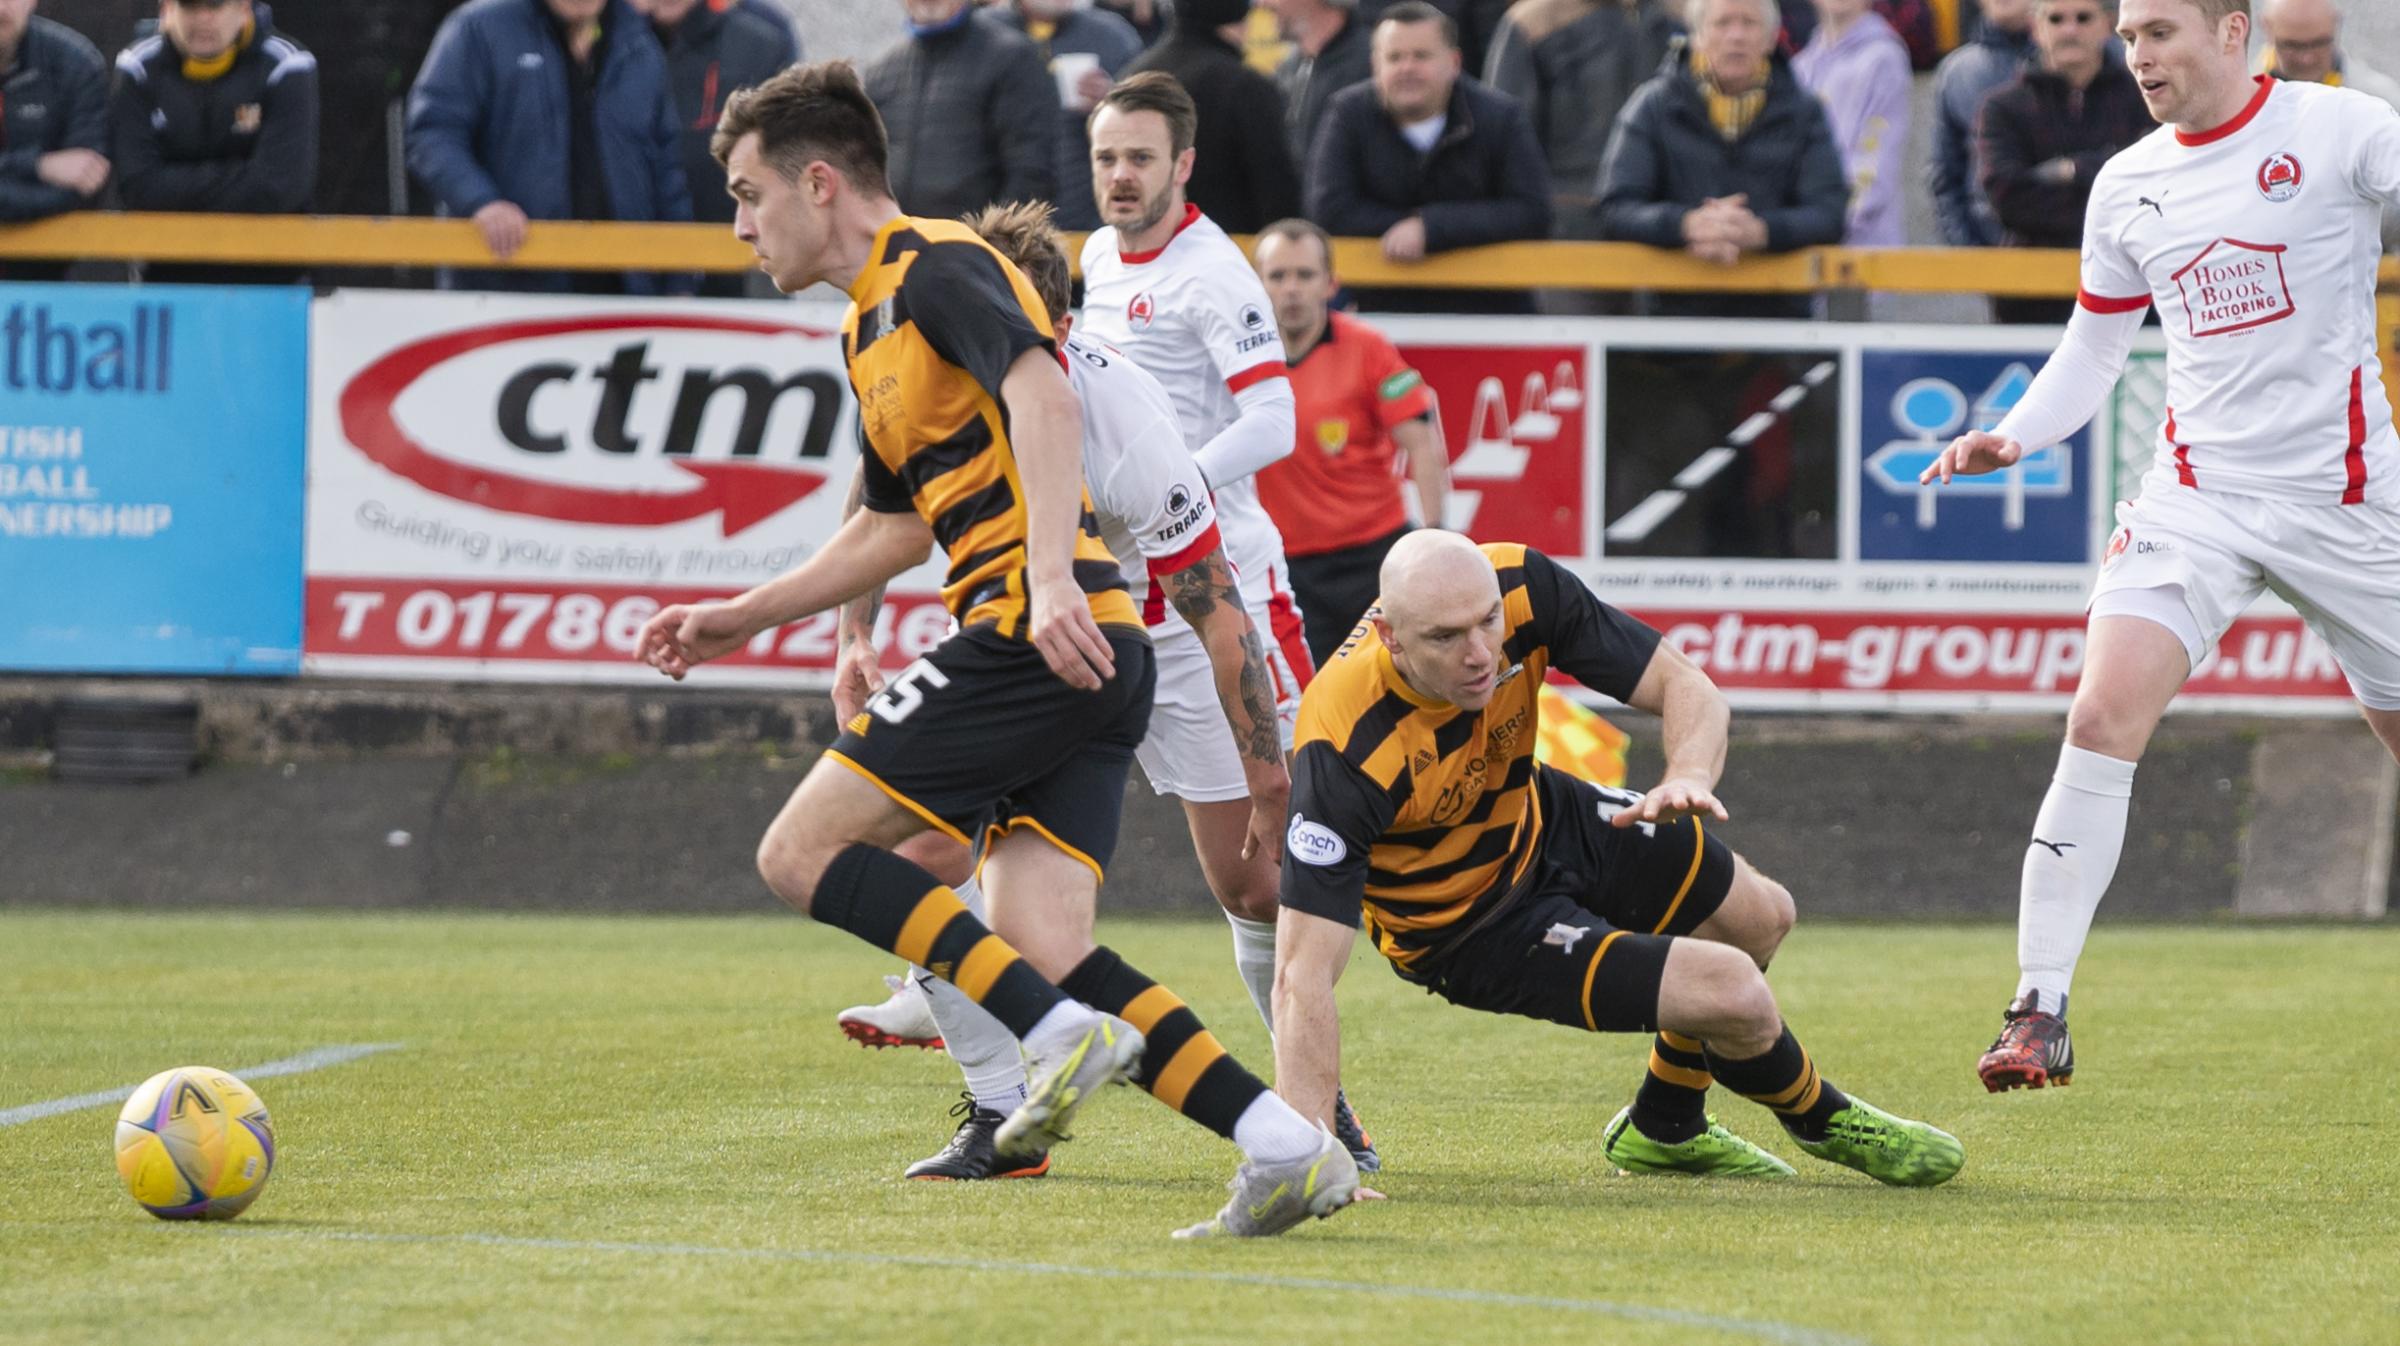 Alloa Athletic's Ross MacIver delighted after bagging goal against Clyde